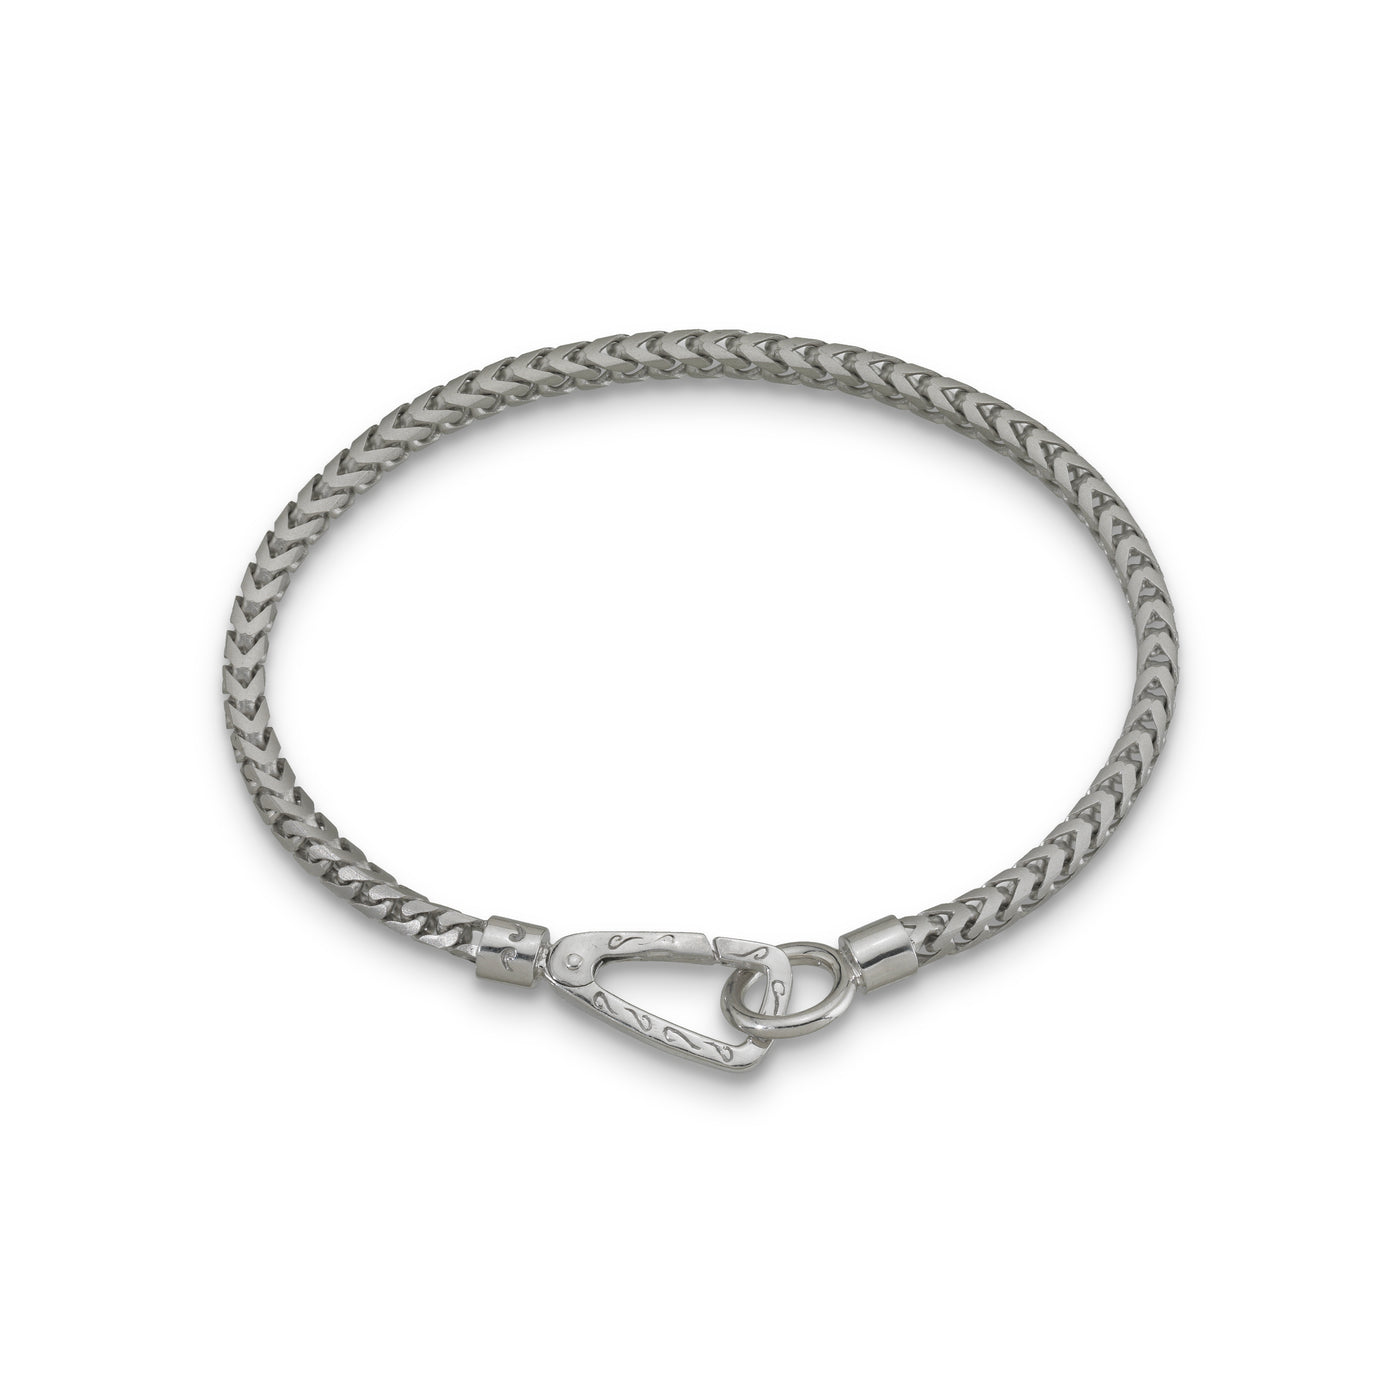 ULYSSES Silver Bracelet with Matte Chain and Polished Clasp